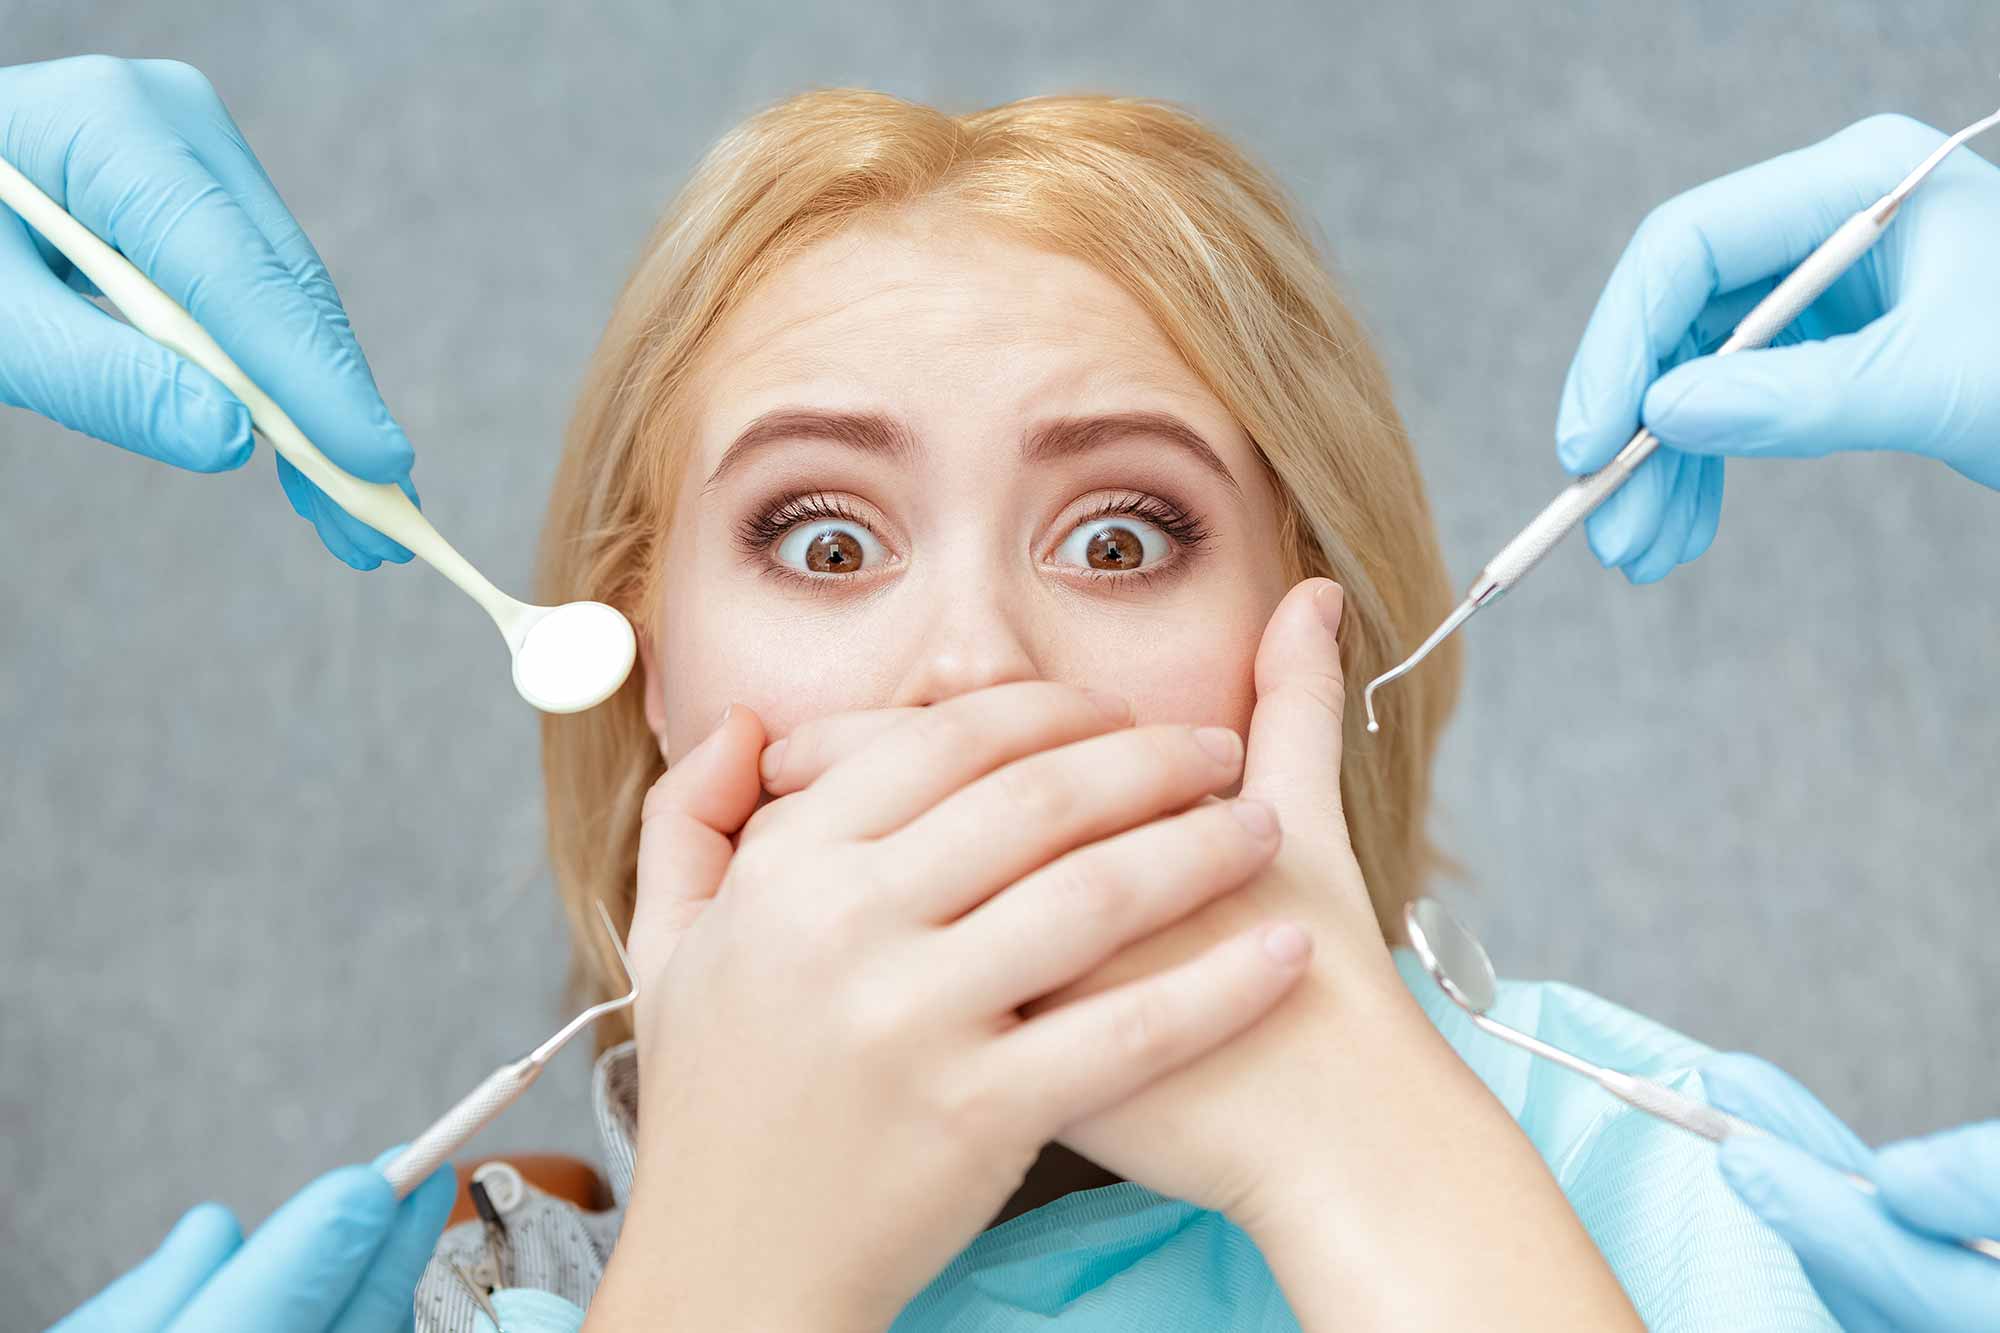 Fear of pain among the key reasons why UK workers avoid the dentist